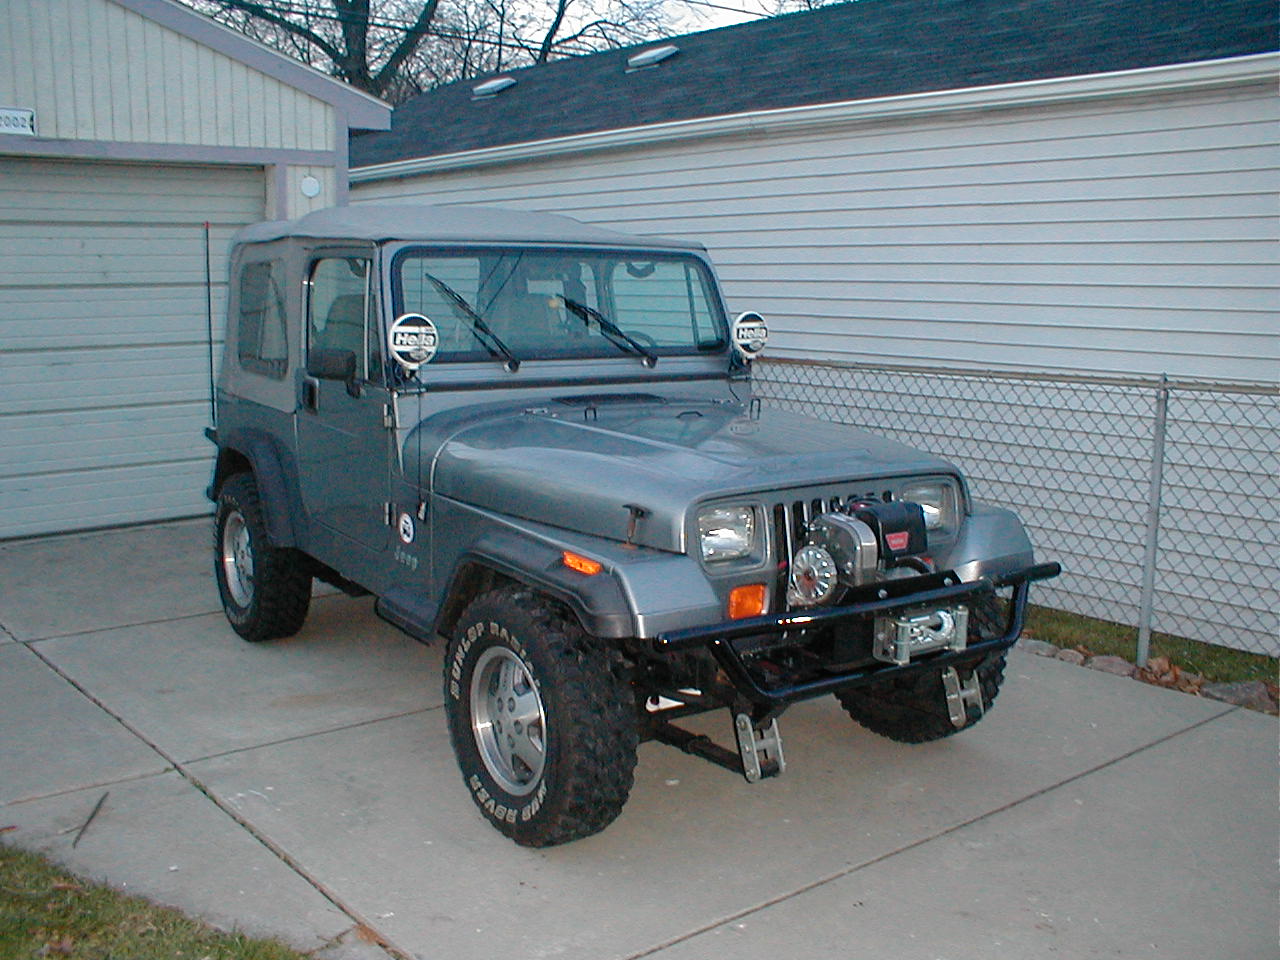 Baby_Jeep_Front.jpg (18K)